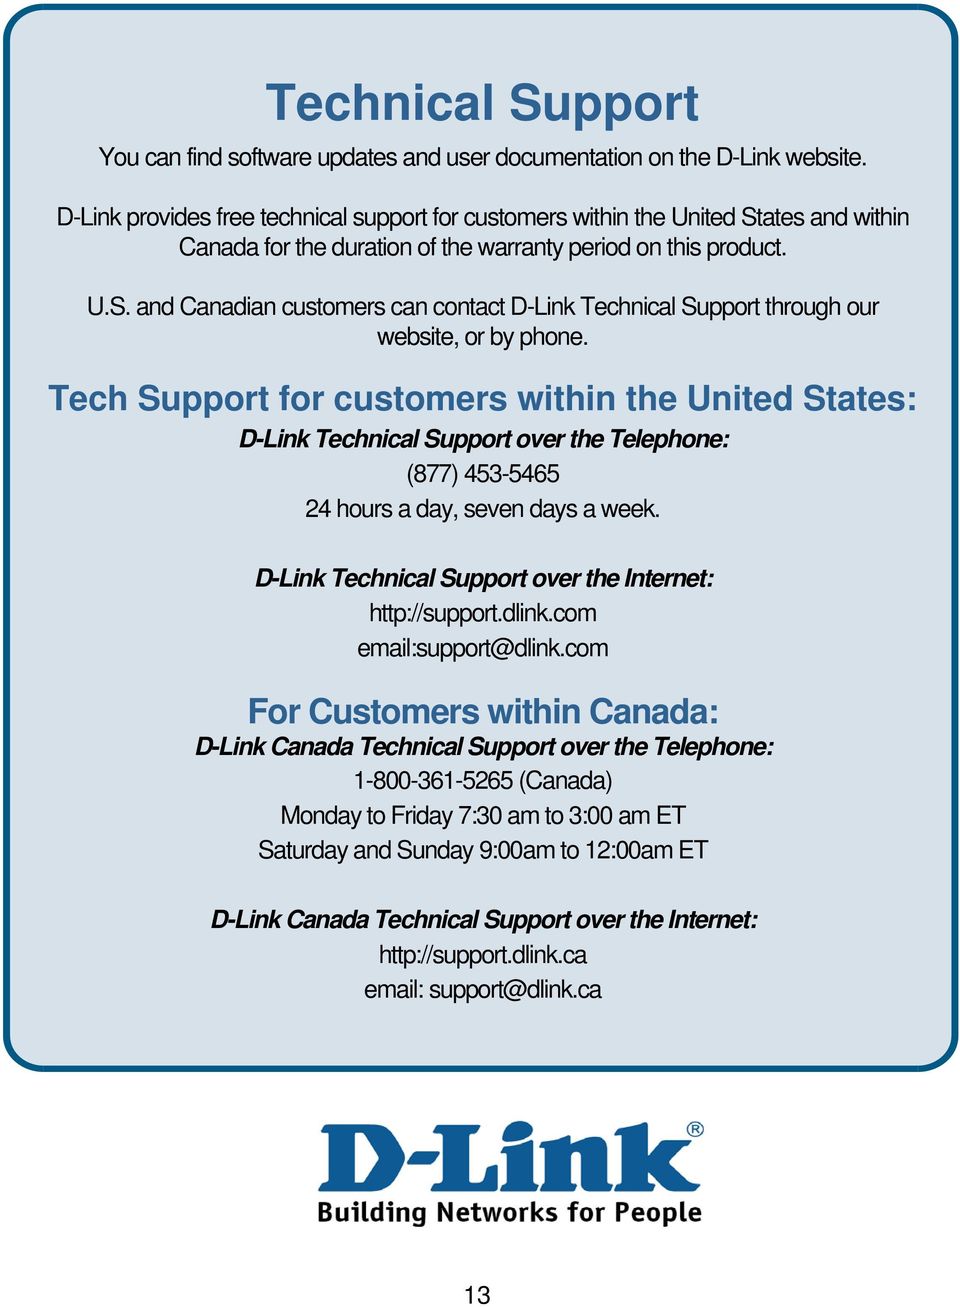 Tech Support for customers within the United States: D-Link Technical Support over the Telephone: (877) 453-5465 24 hours a day, seven days a week.